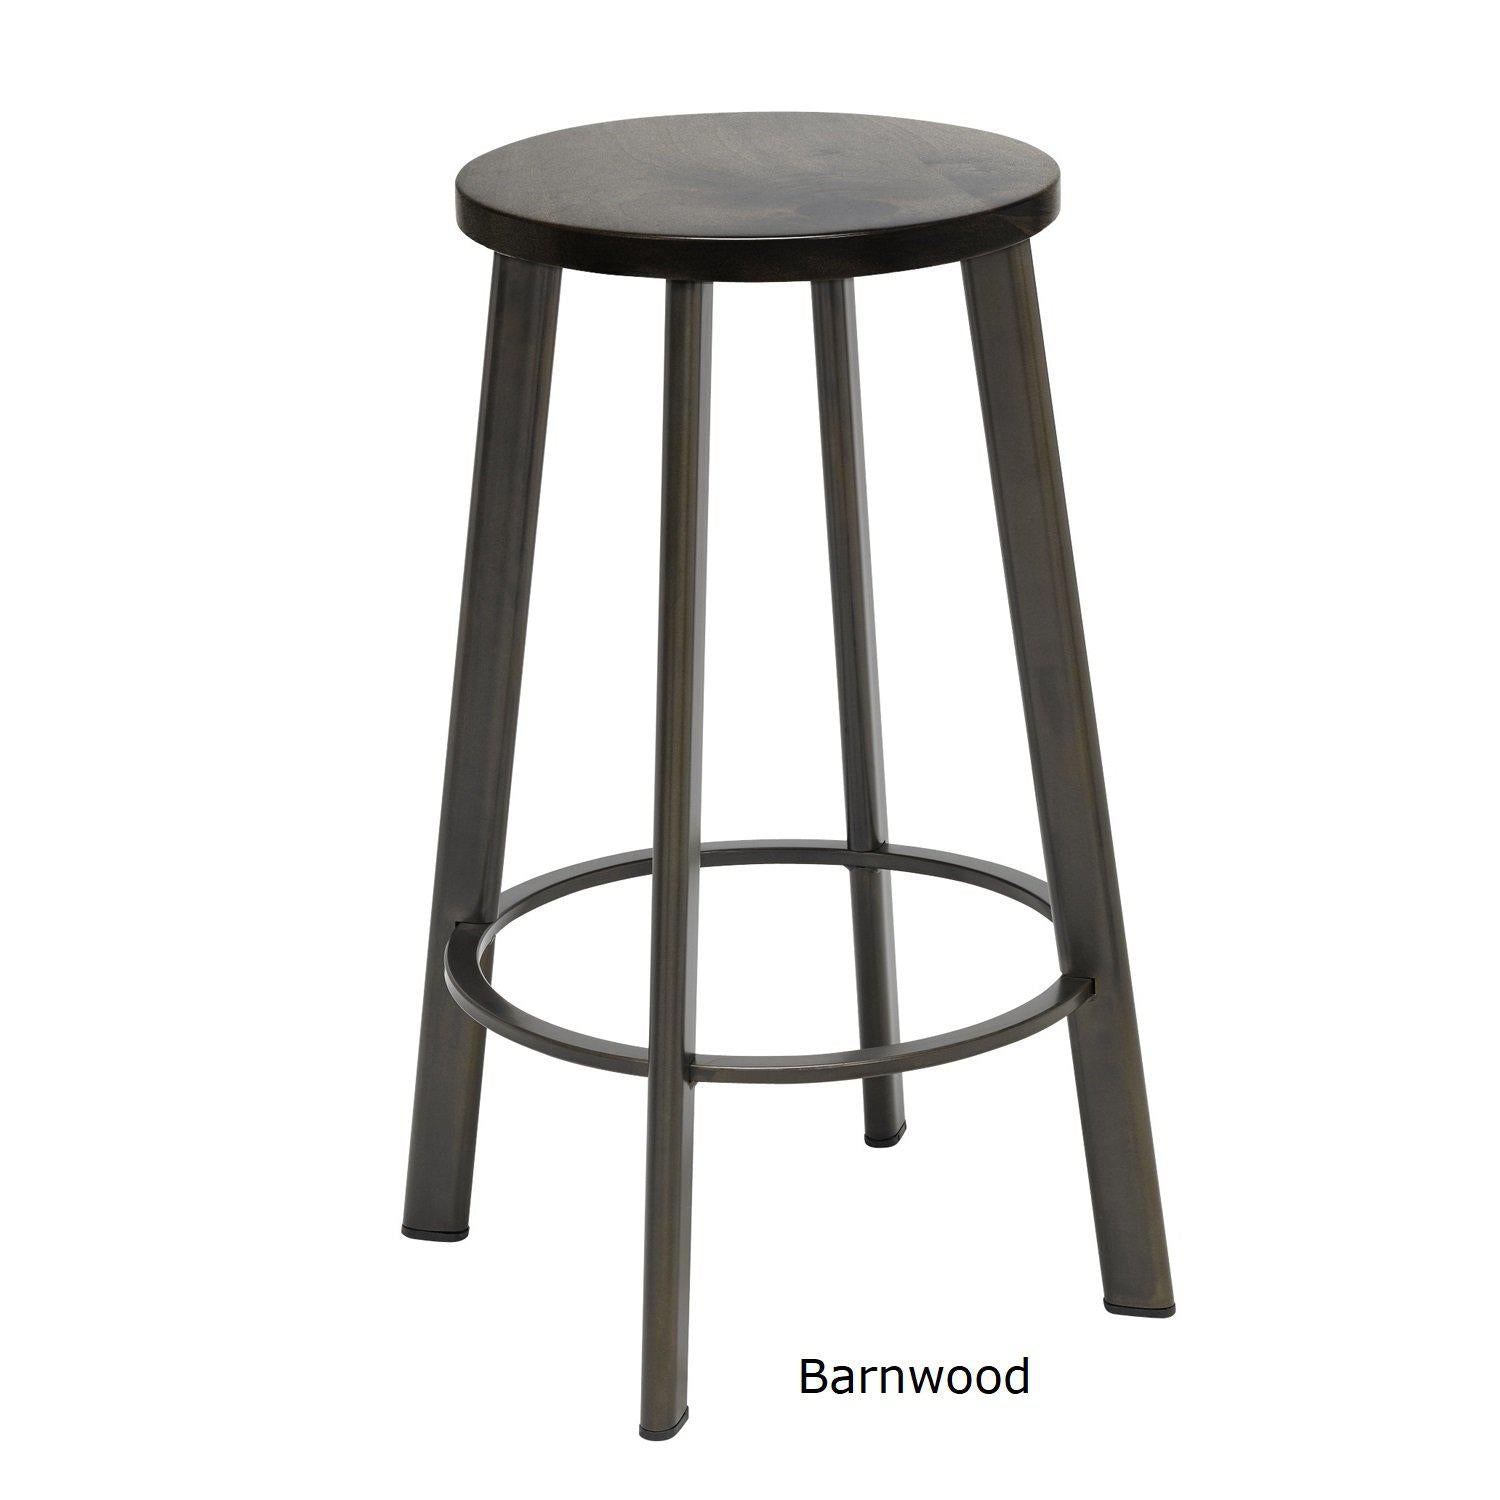 Metro Stool, Natural Steel Frame, Wood Seat, Counter Height, 25"H